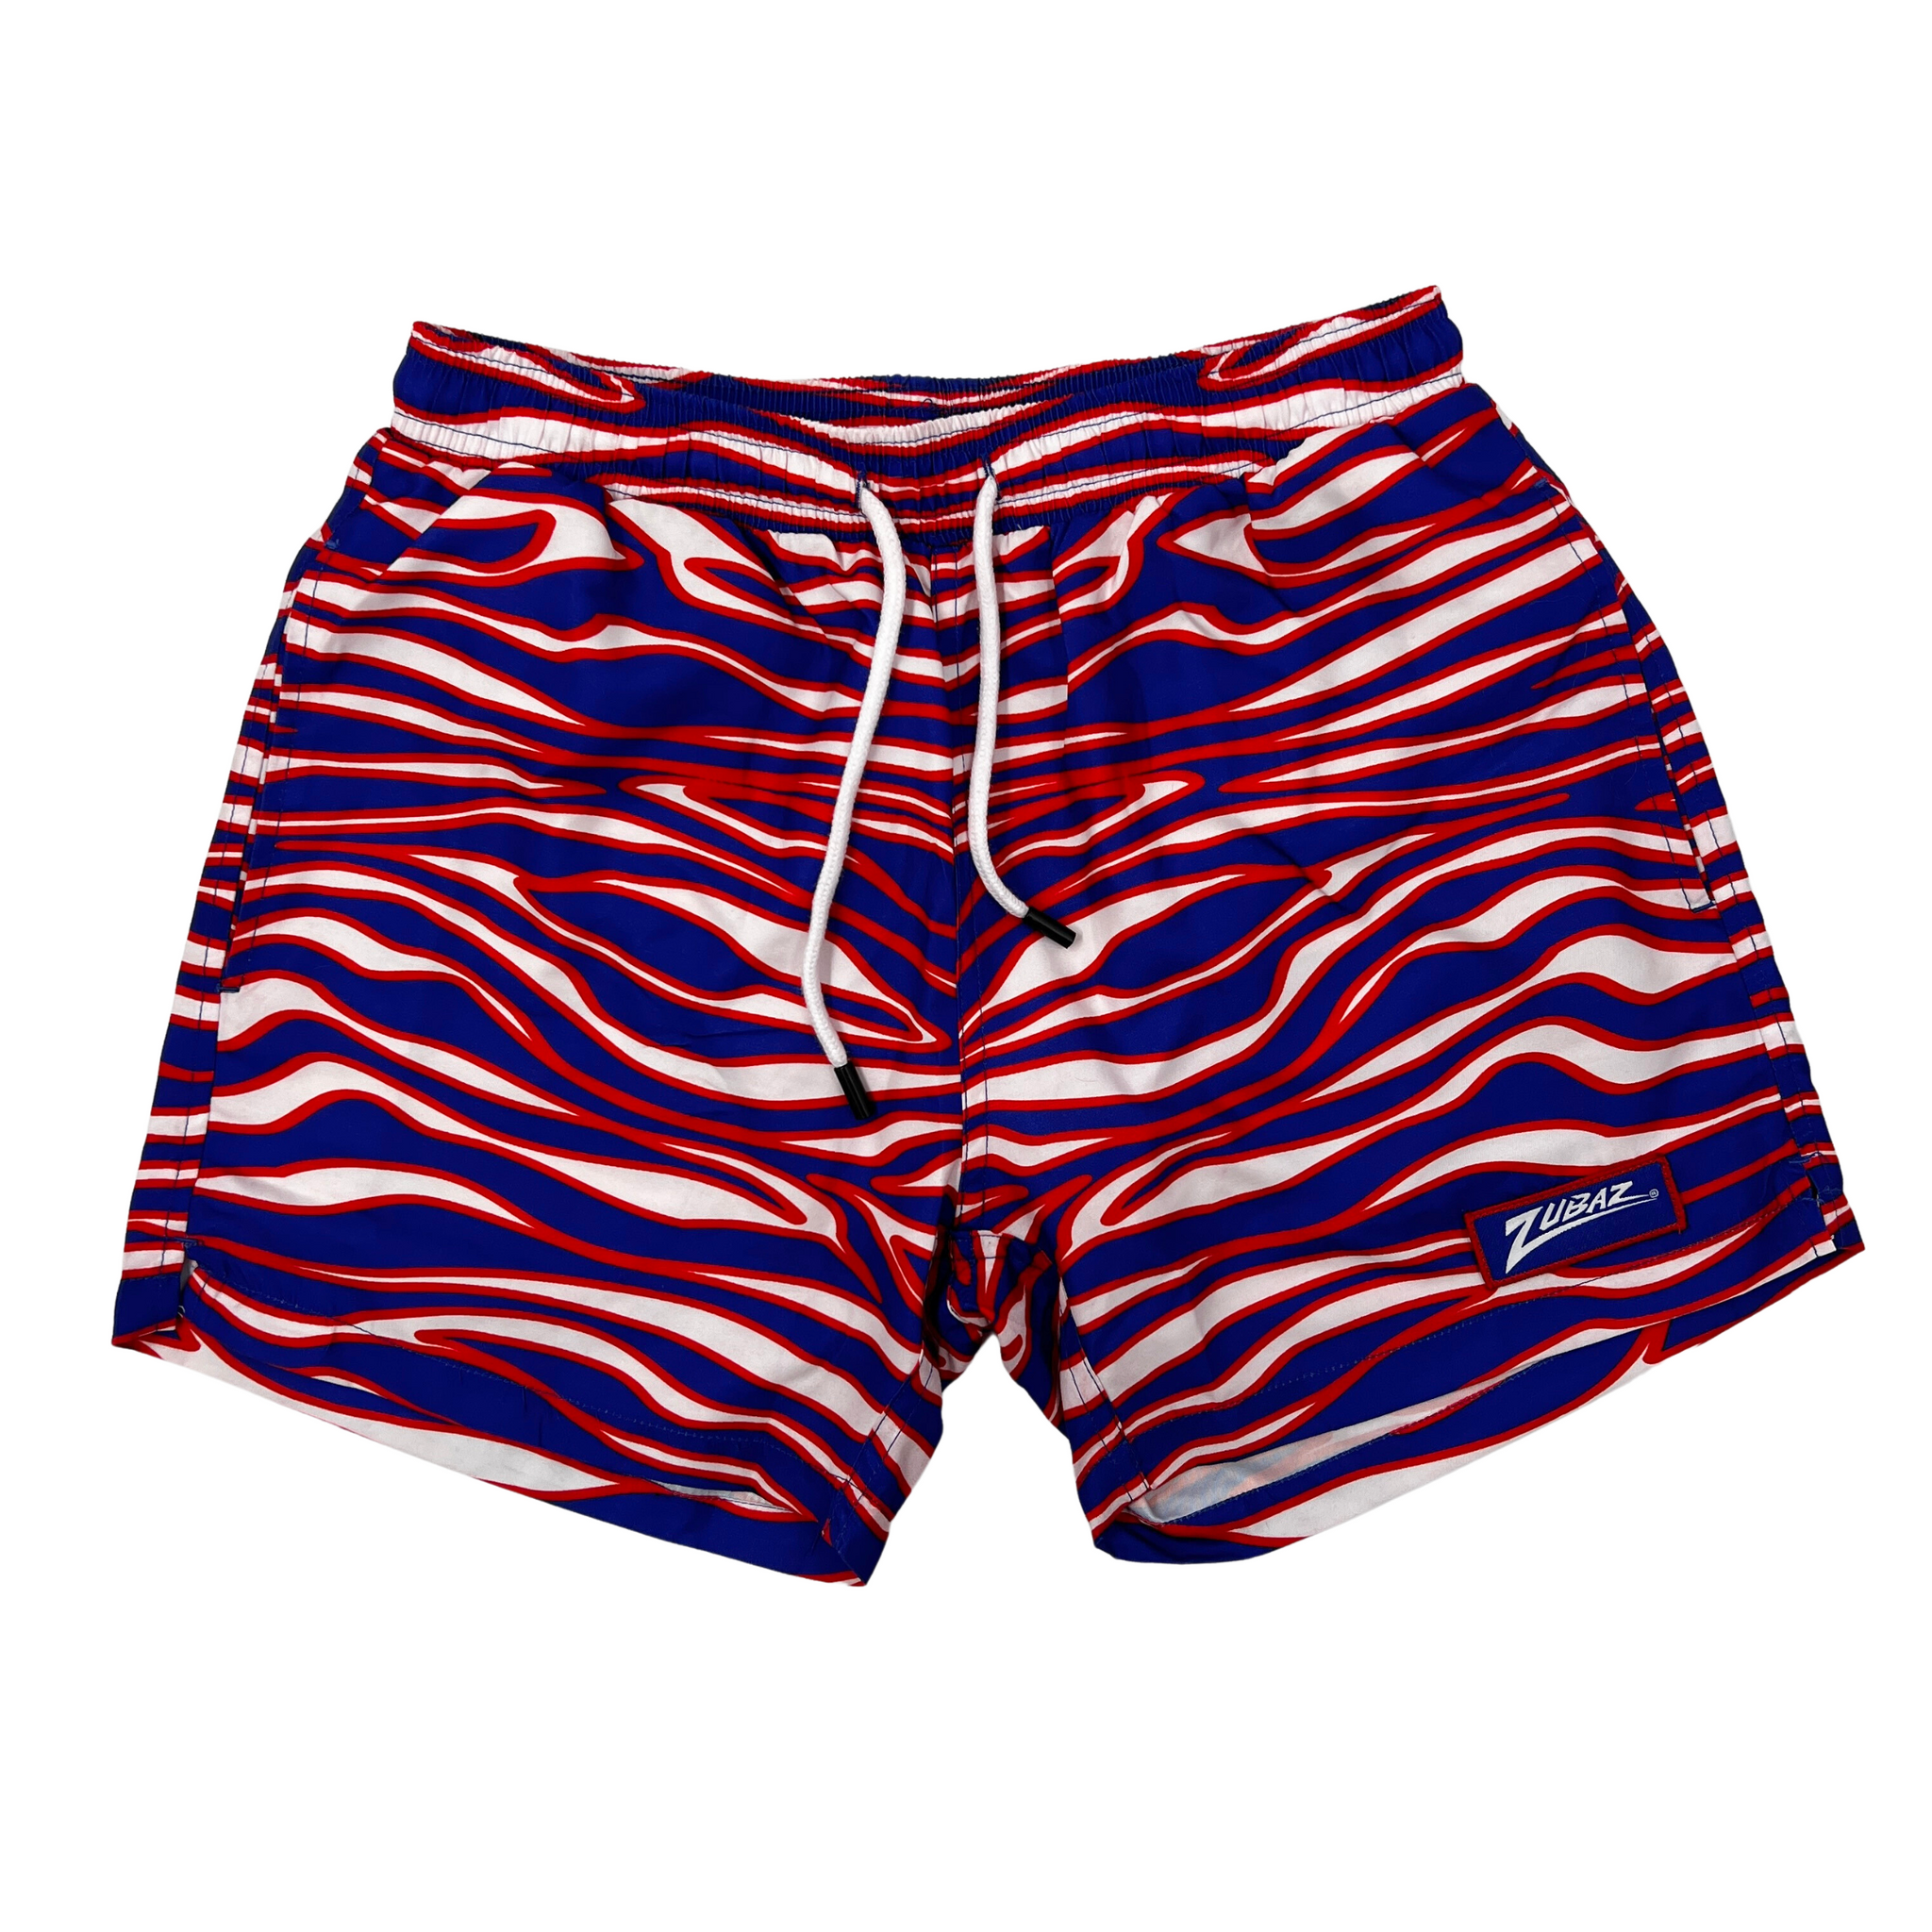 The Best Bathing Suits for The BFLO Summer | The BFLO Store